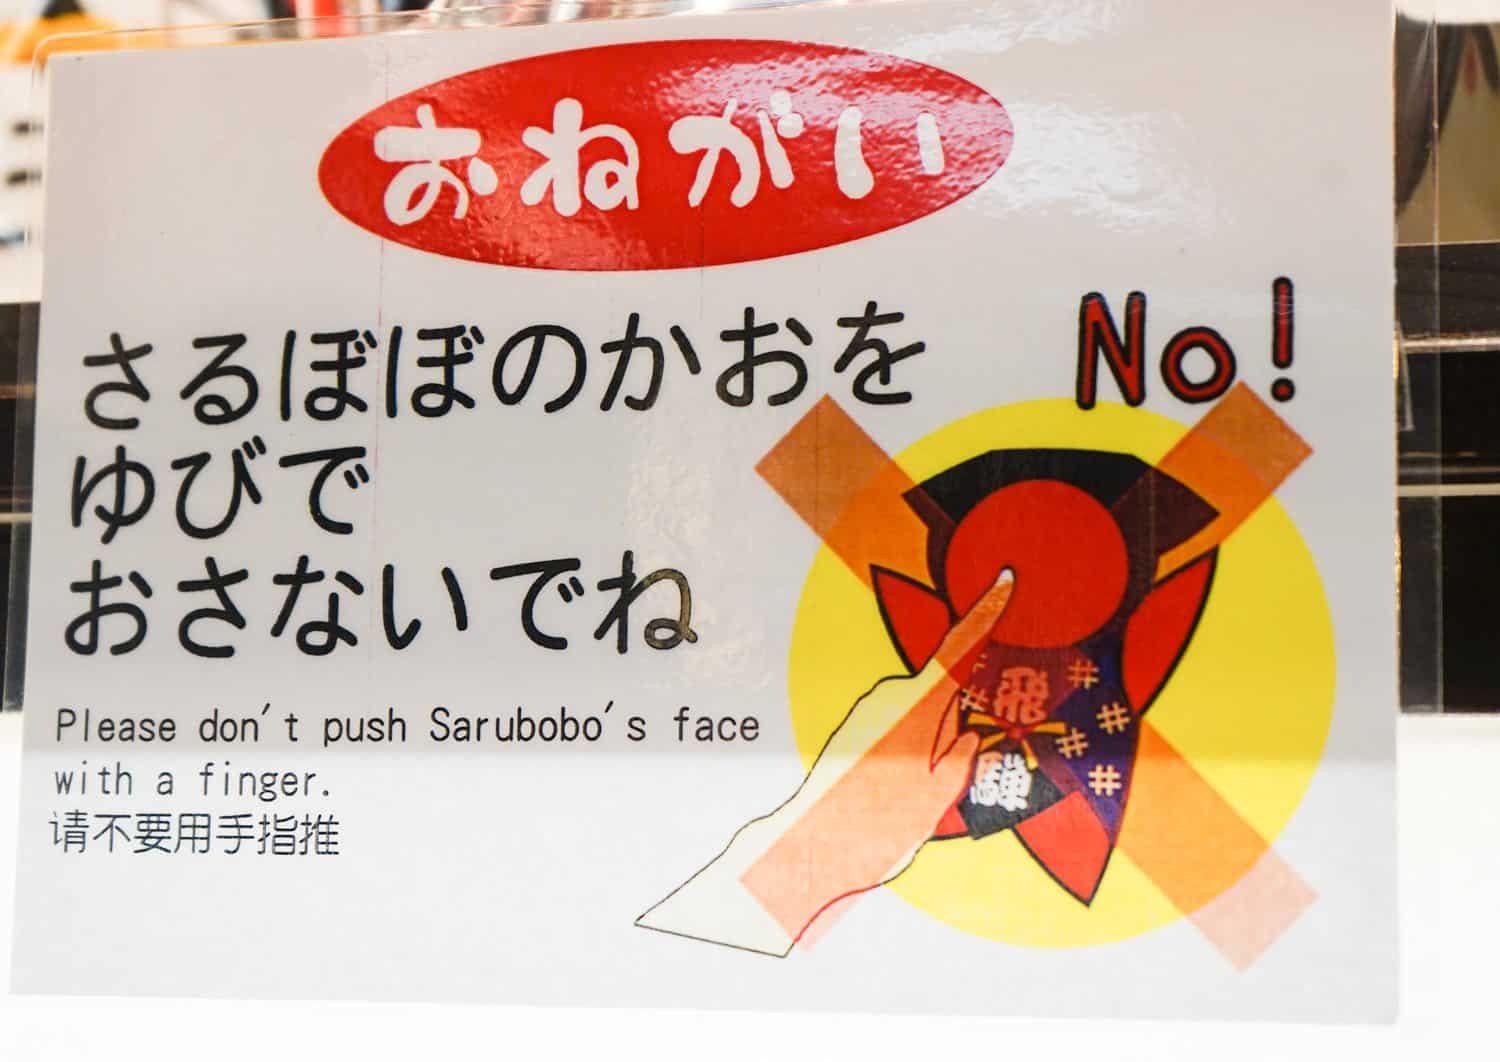 Funny sign in Japan